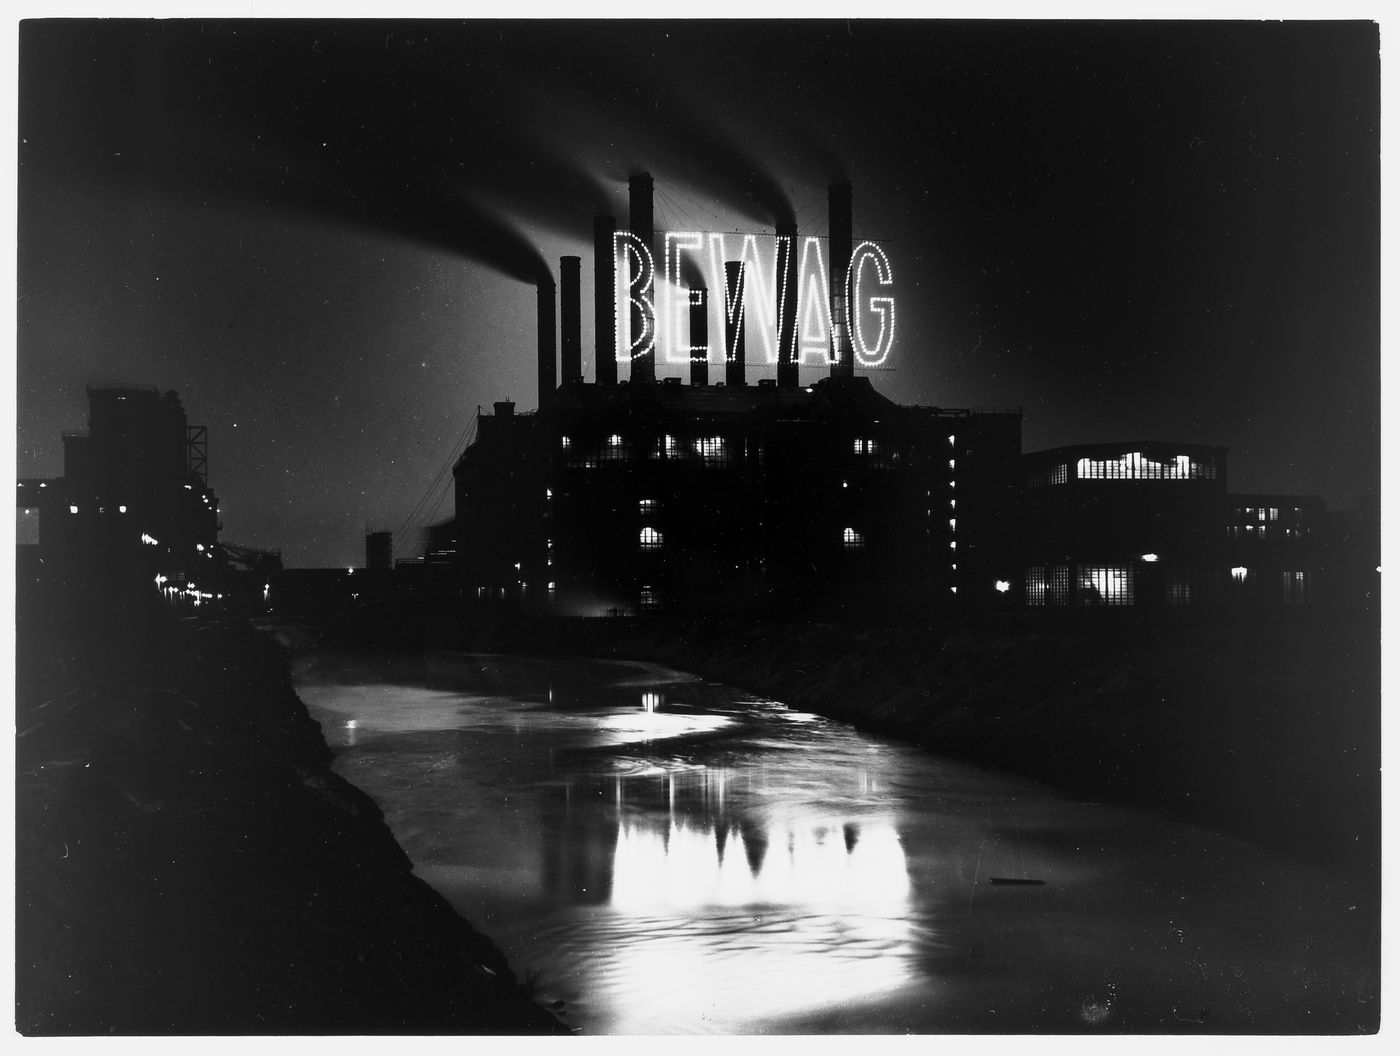 Night view of illuminated sign on factory building, Berlin, Germany